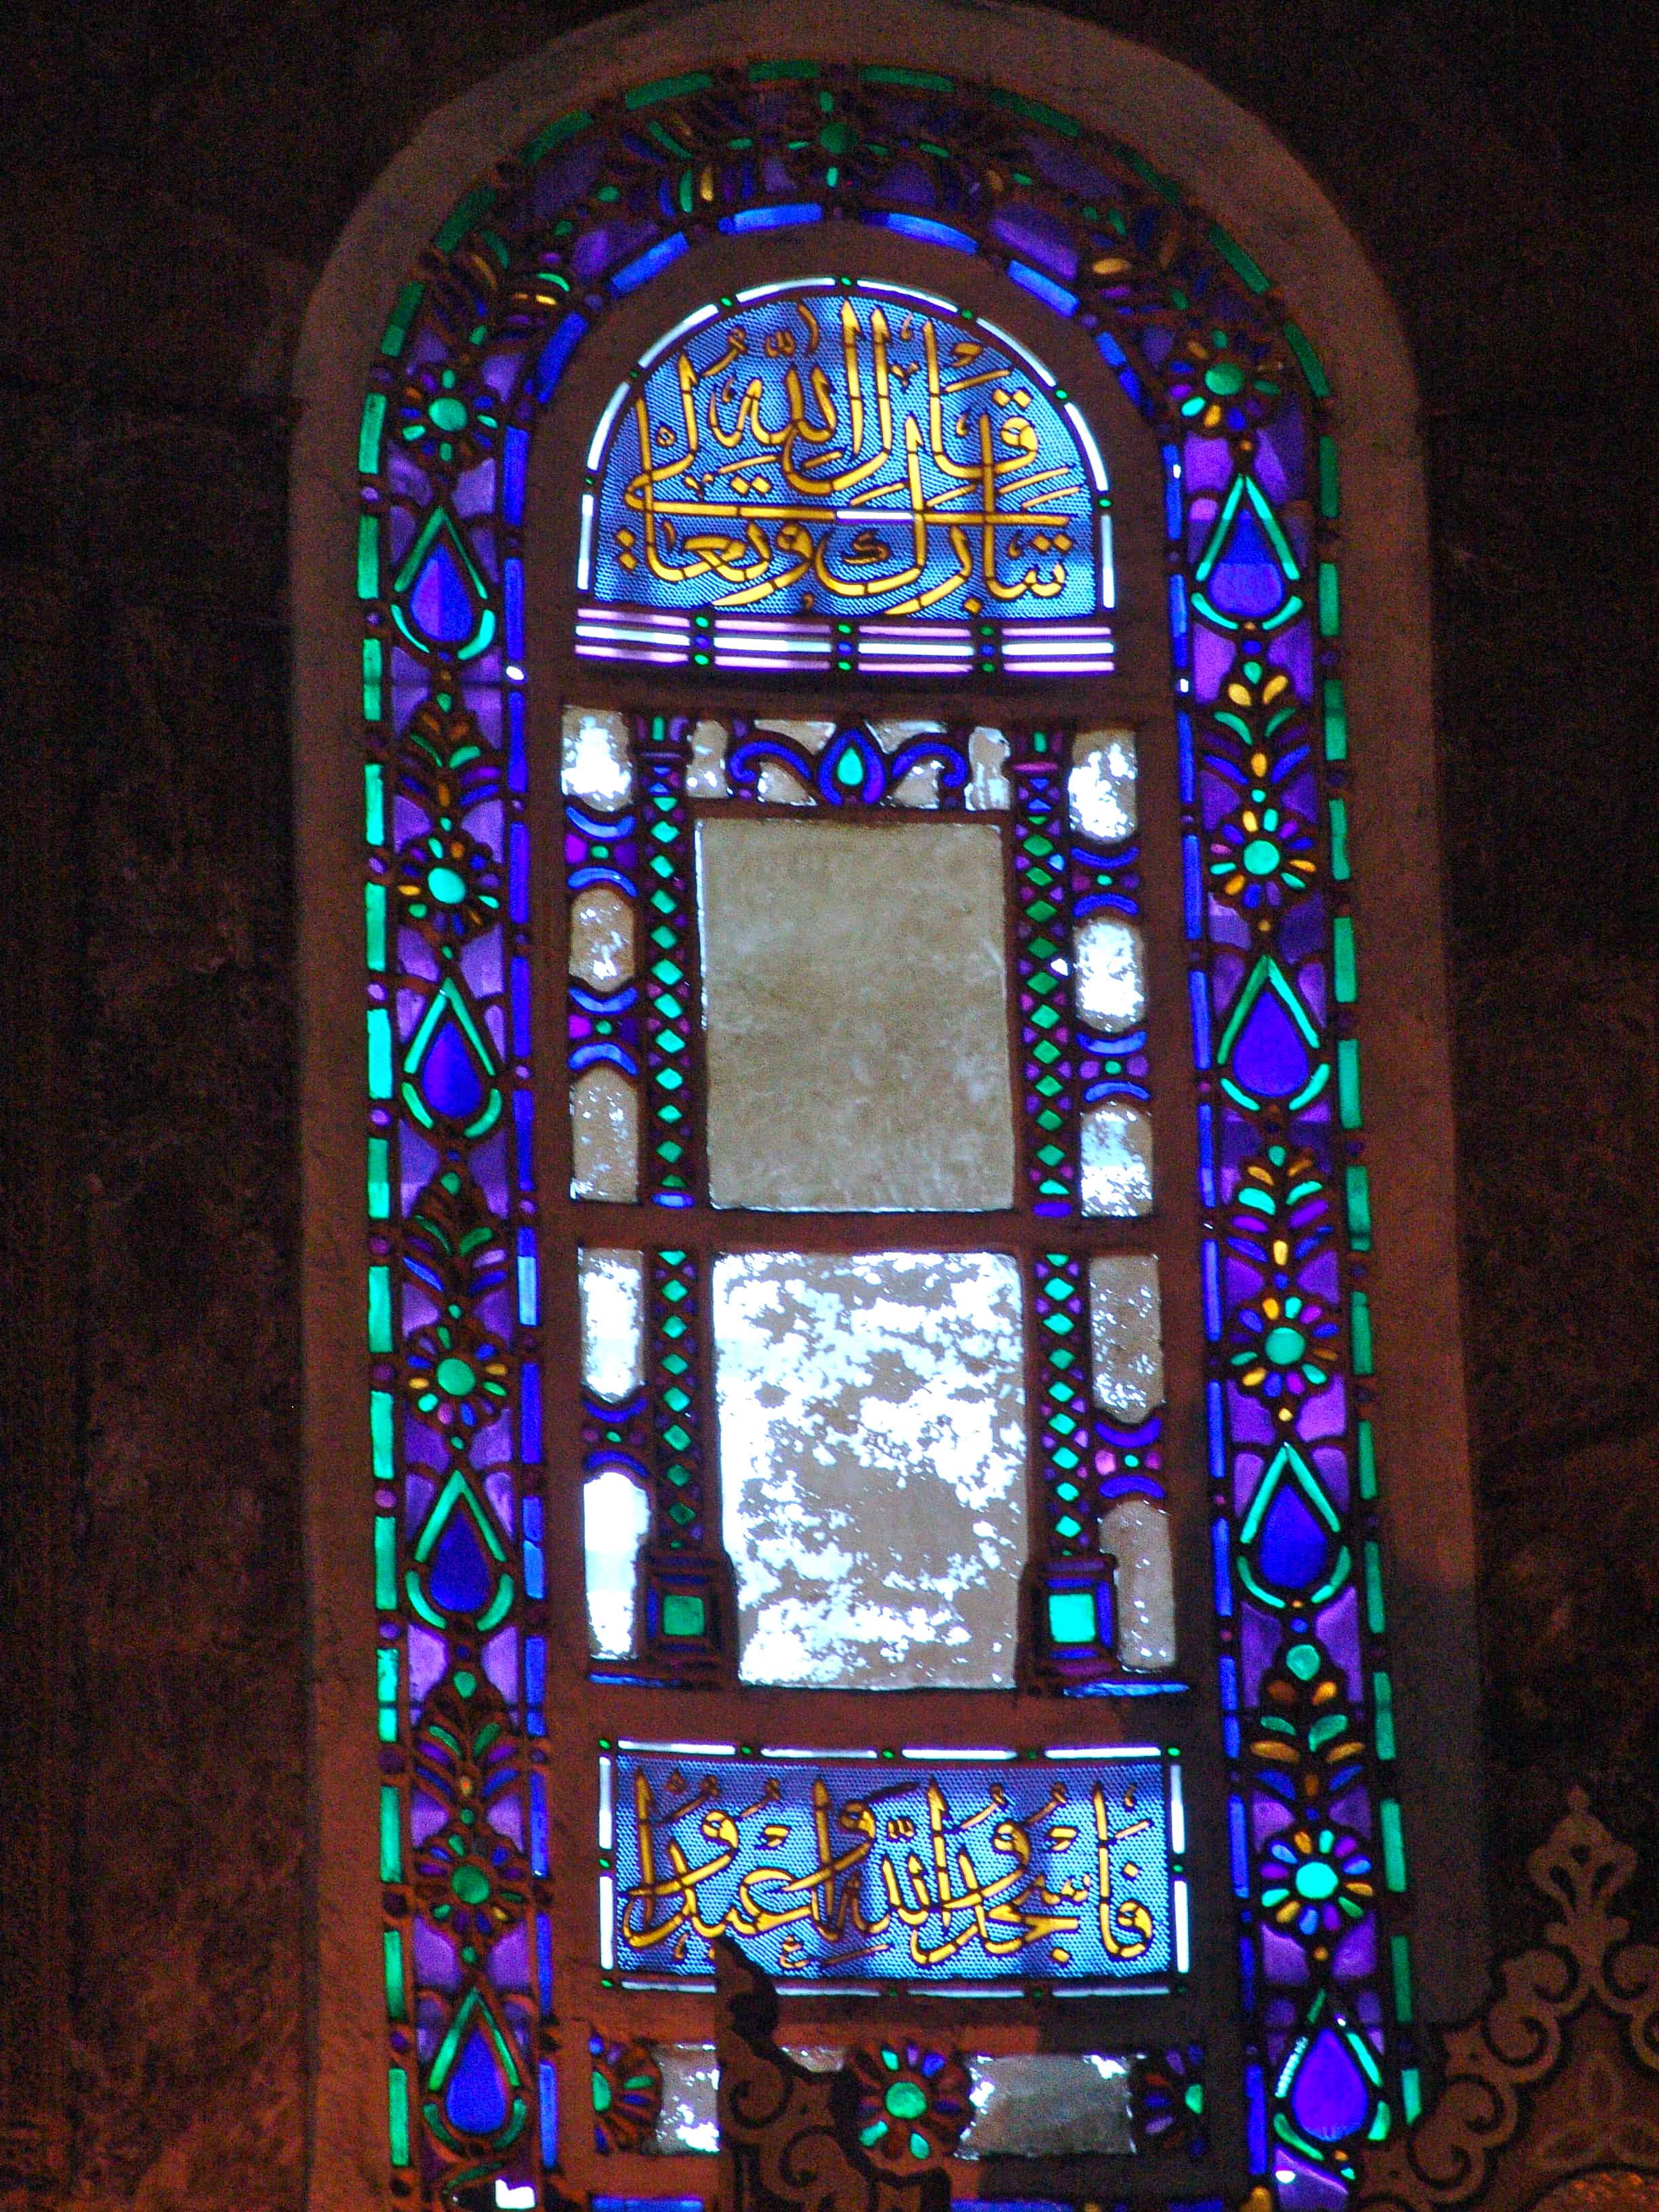 Stained glass window at Hagia Sophia in Istanbul, Turkey